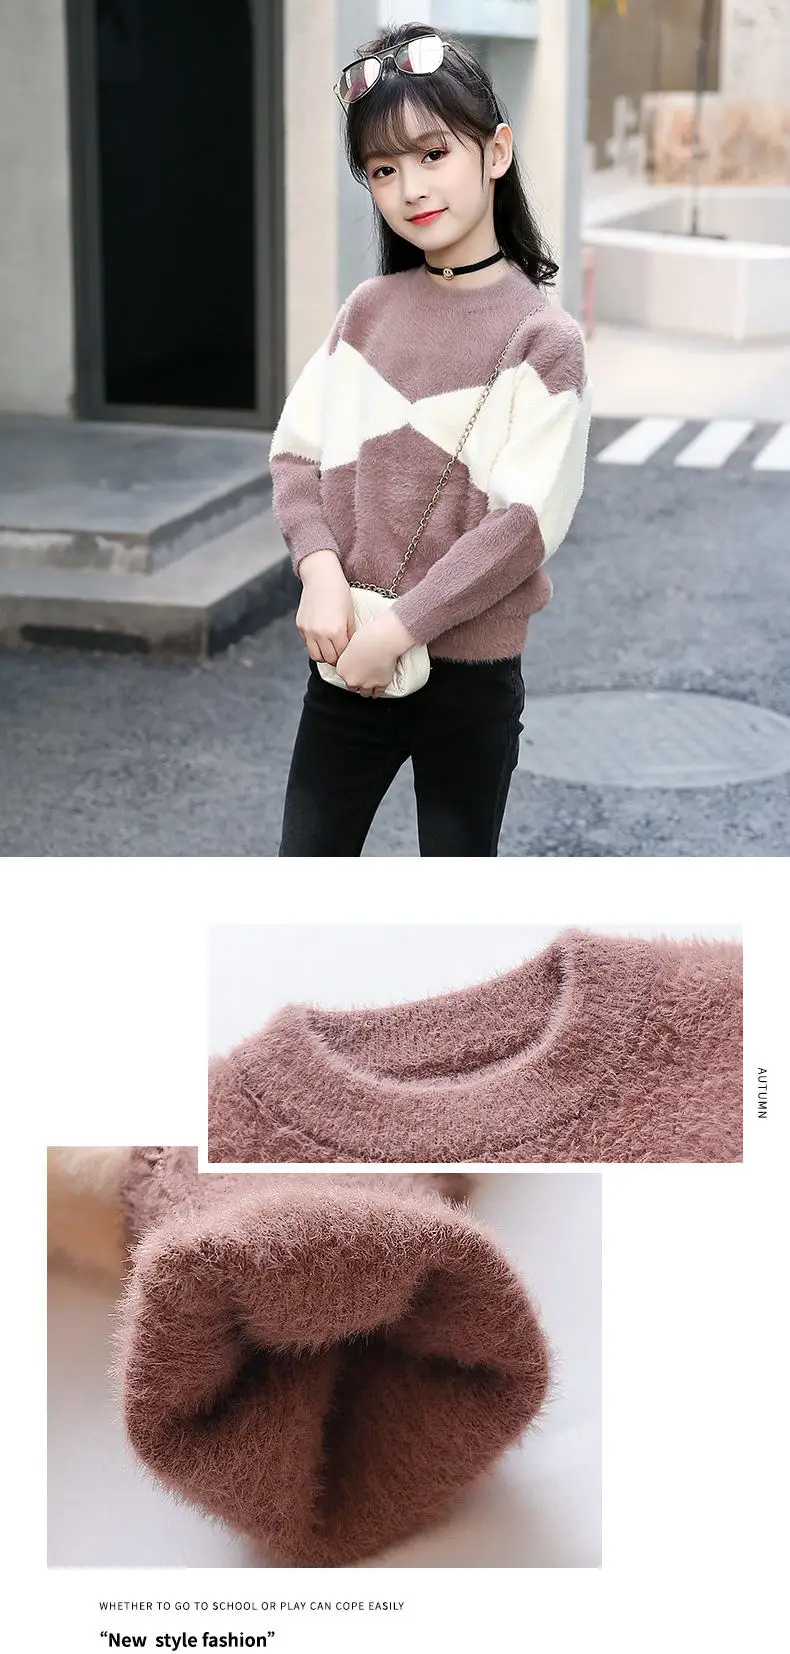 Teen Girl Sweater New Fashion Knit Thick O-neck Coat Contrasting Color Pullover Sweaters Cotton Knitwear Clothes 6 8 10 13Y